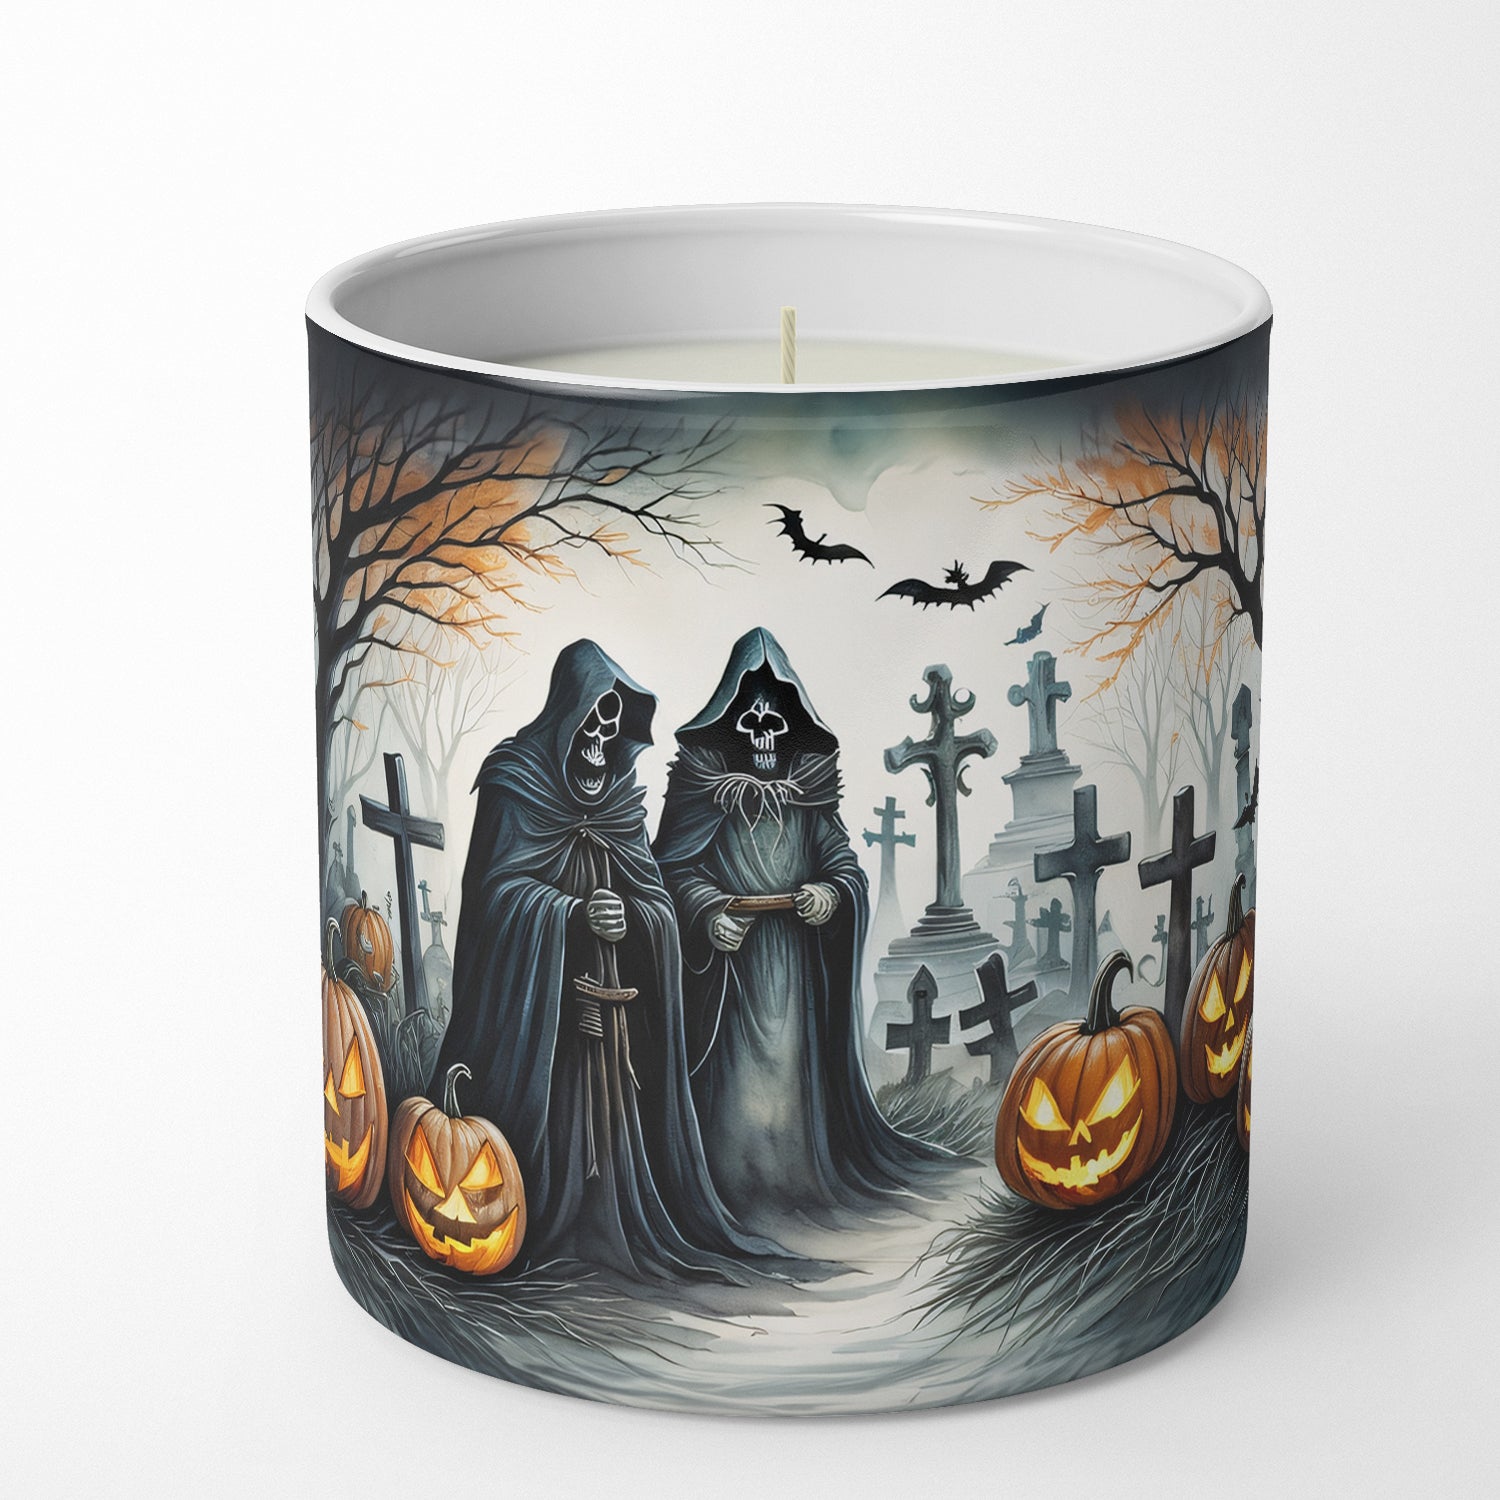 Buy this The Grim Reaper Spooky Halloween Decorative Soy Candle